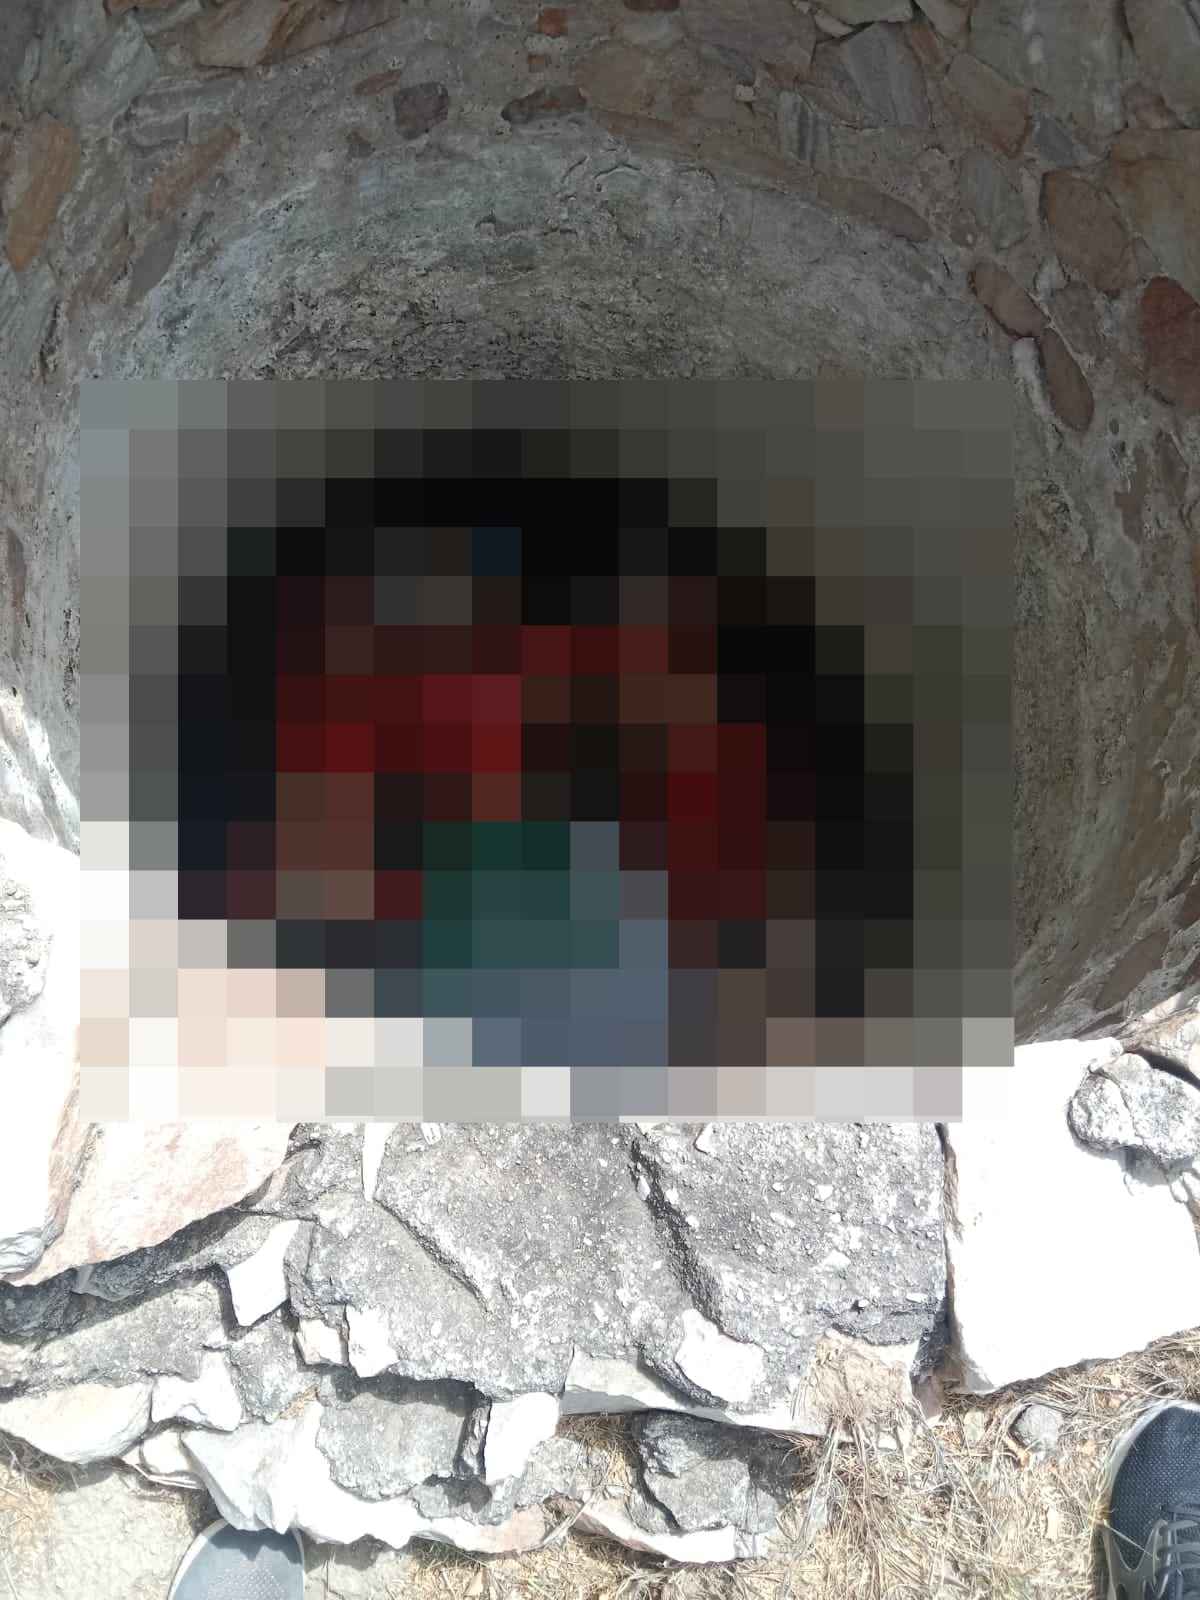 Dead Bodies in a well